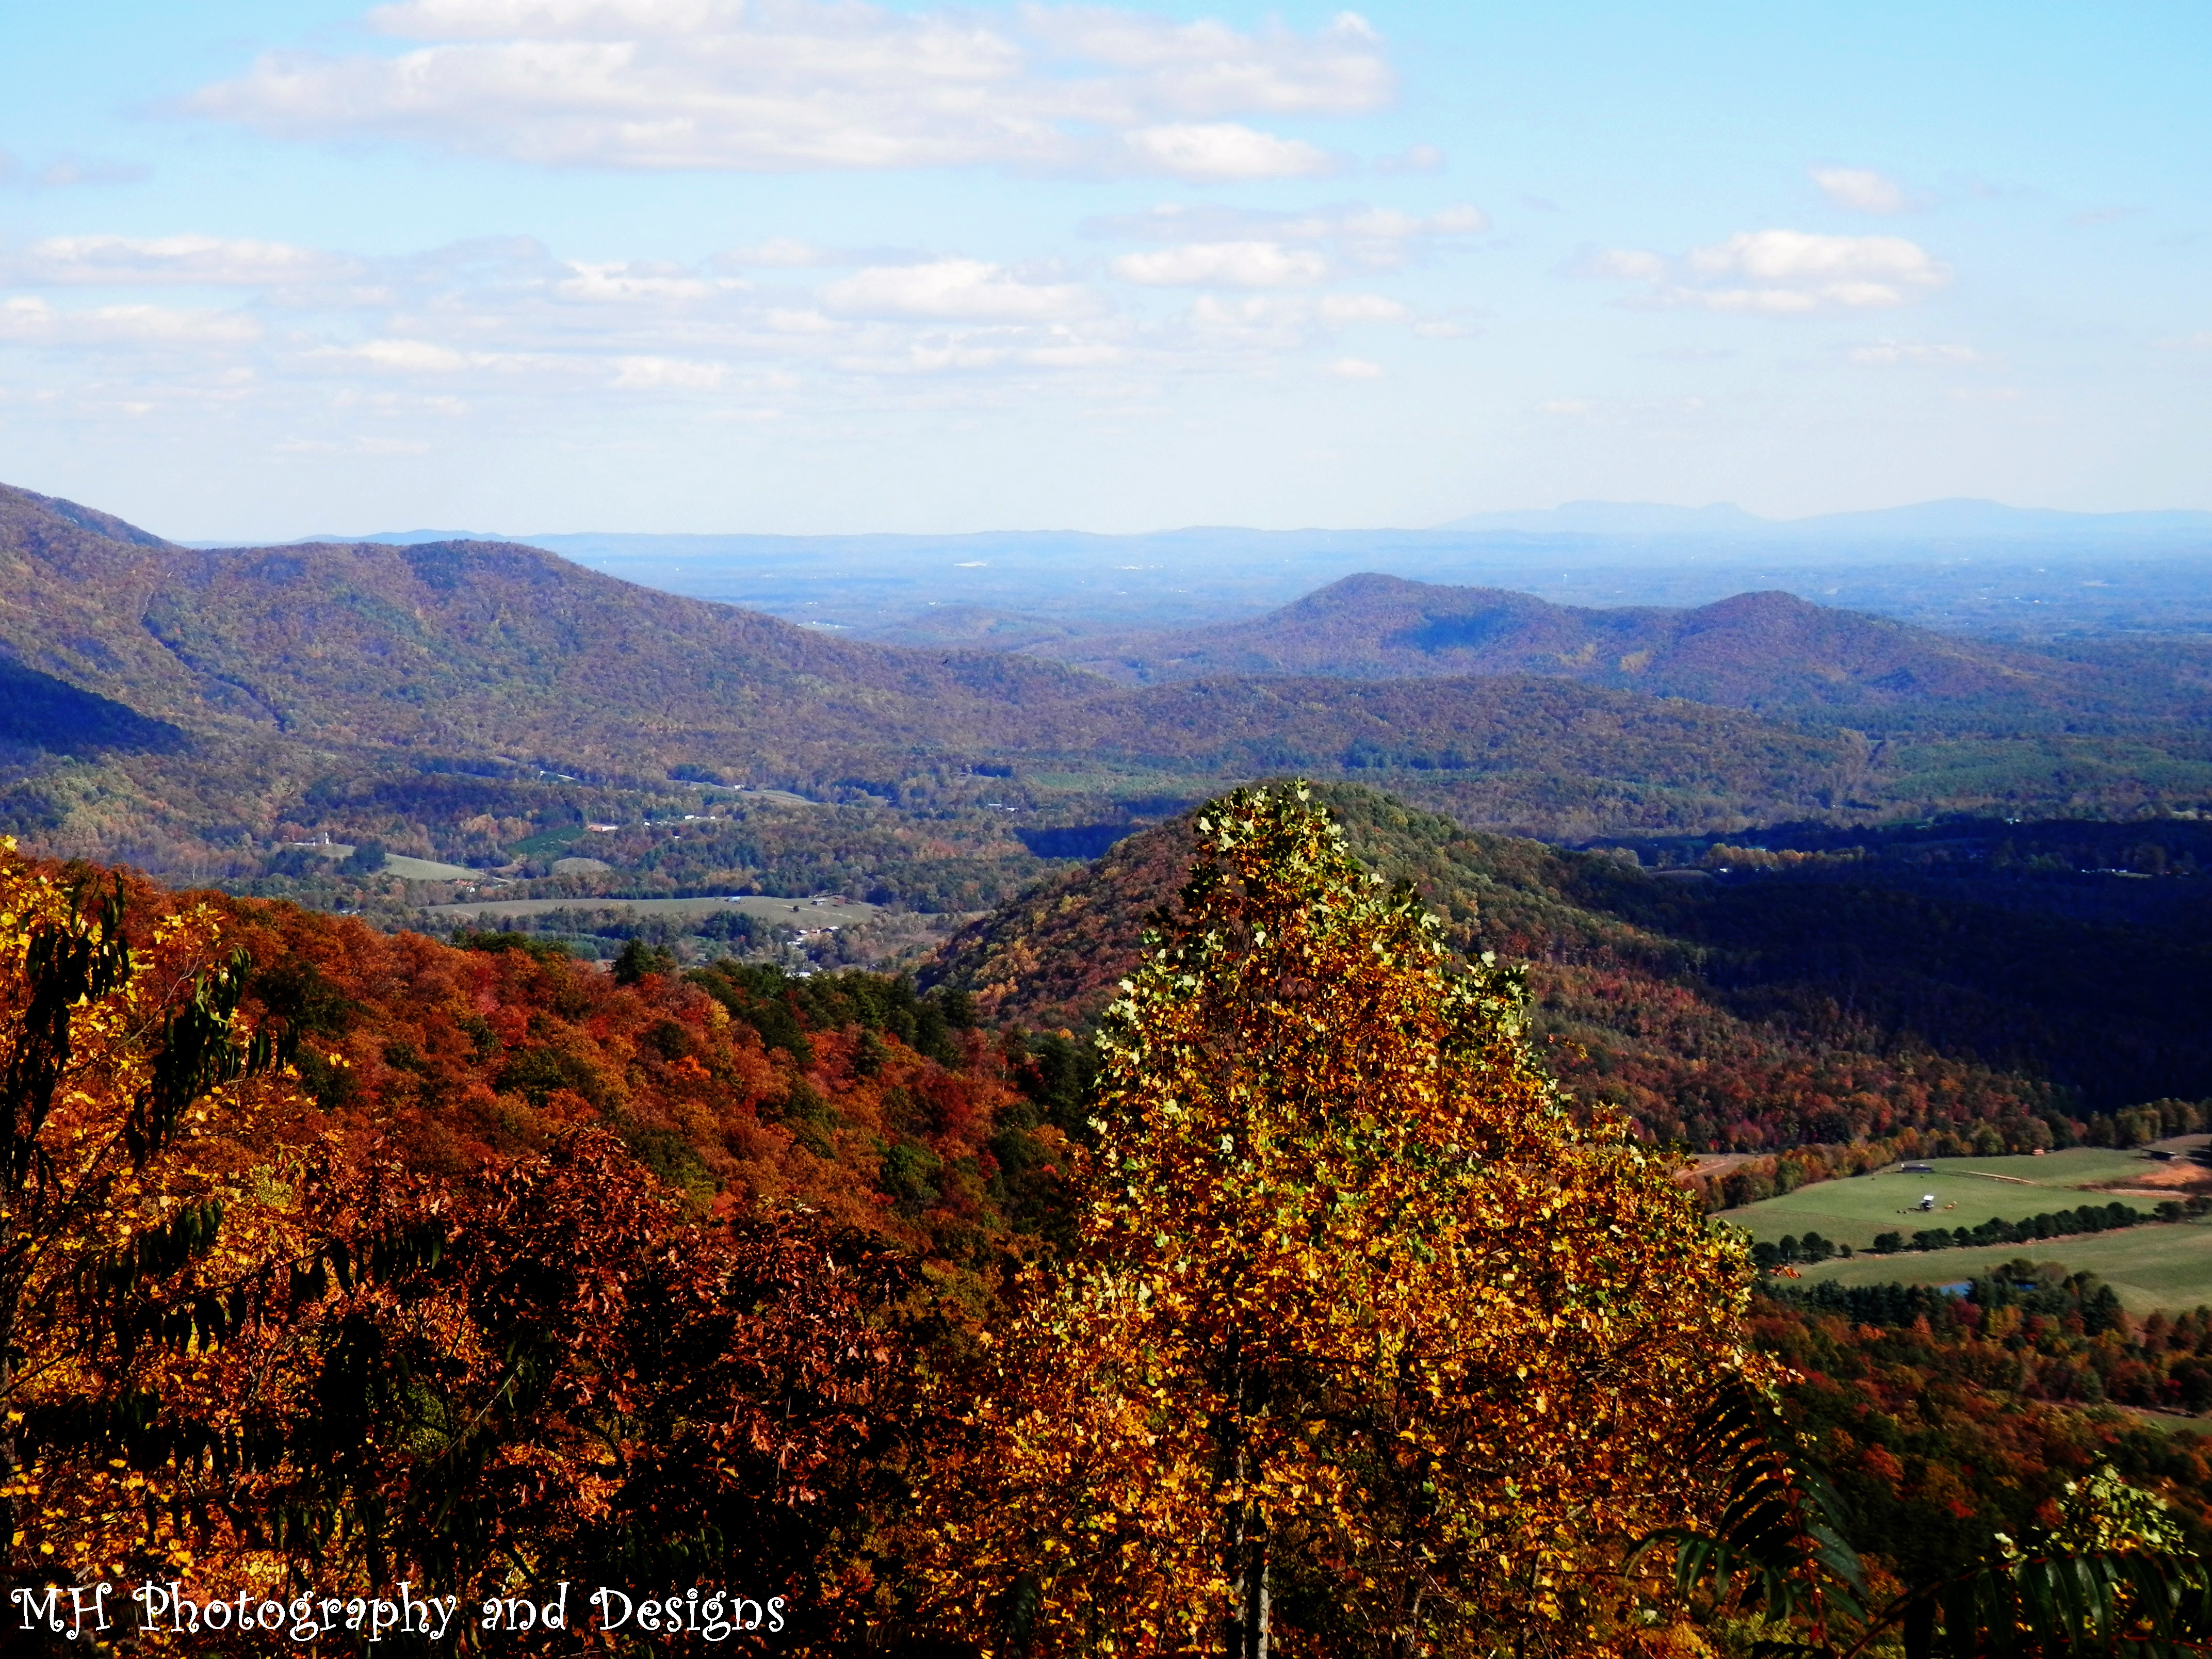 Blue Ridge Parkway, mountain beauty | MH Photography & Designs